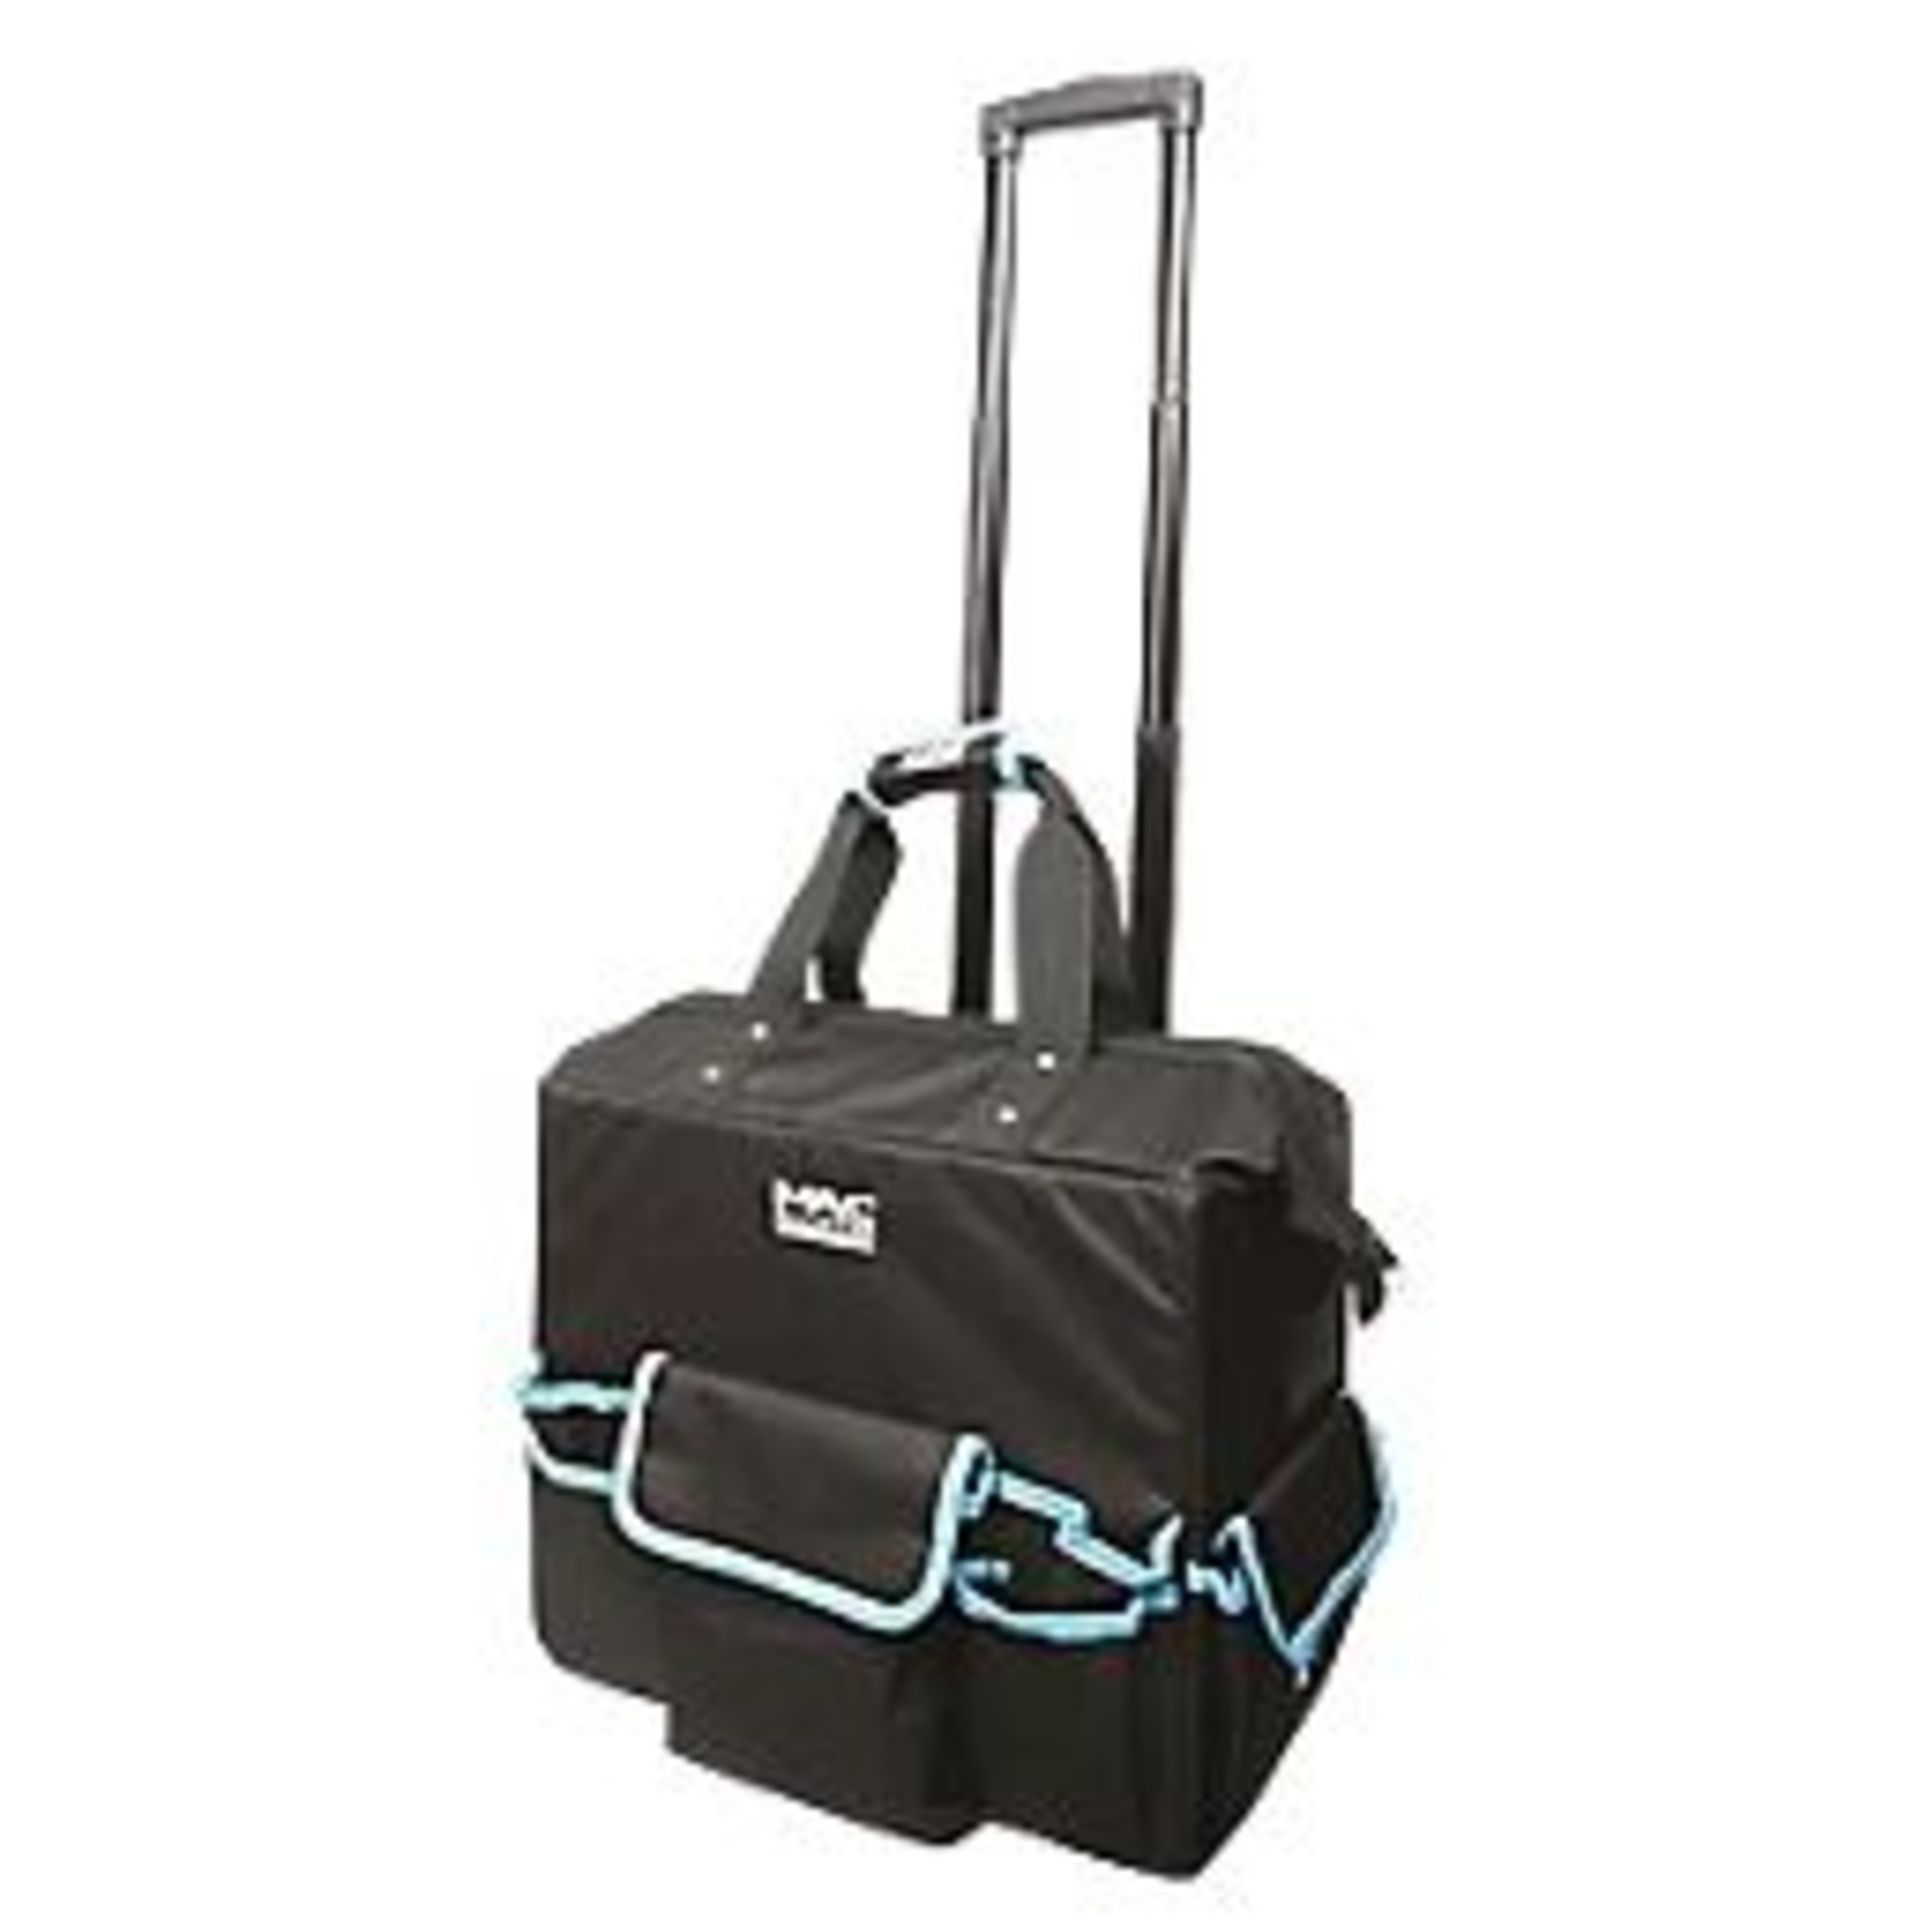 MAC ALLISTER HARD BASE TOOL BAG WITH WHEELS 18". - P4. Tool bag with reinforced rubber base.